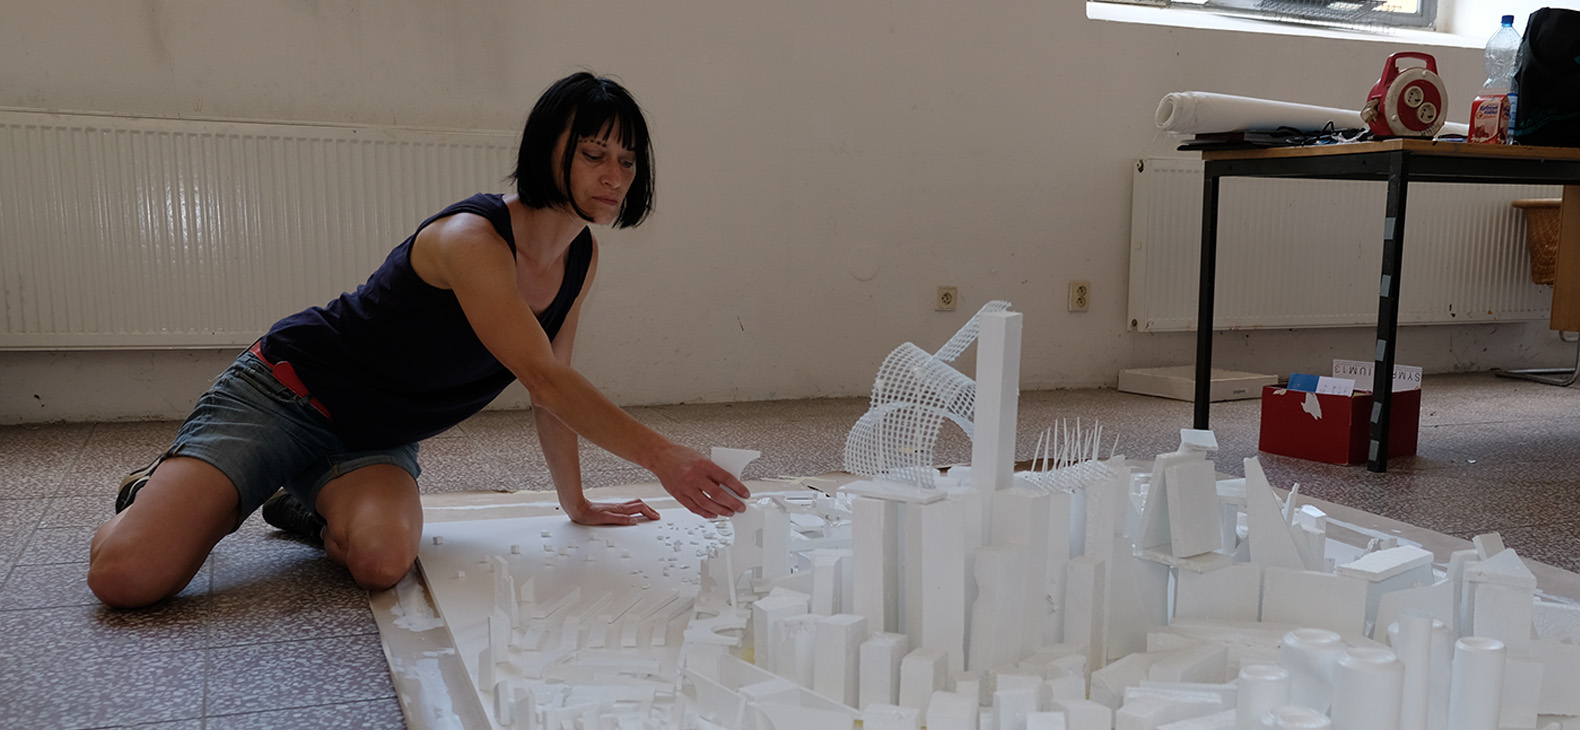 Schafhof Residency Programme; Artists 2023: Margit Greinöcker, image: artist kneeling on the floor over a work that presumably represents some kind of white model of a city